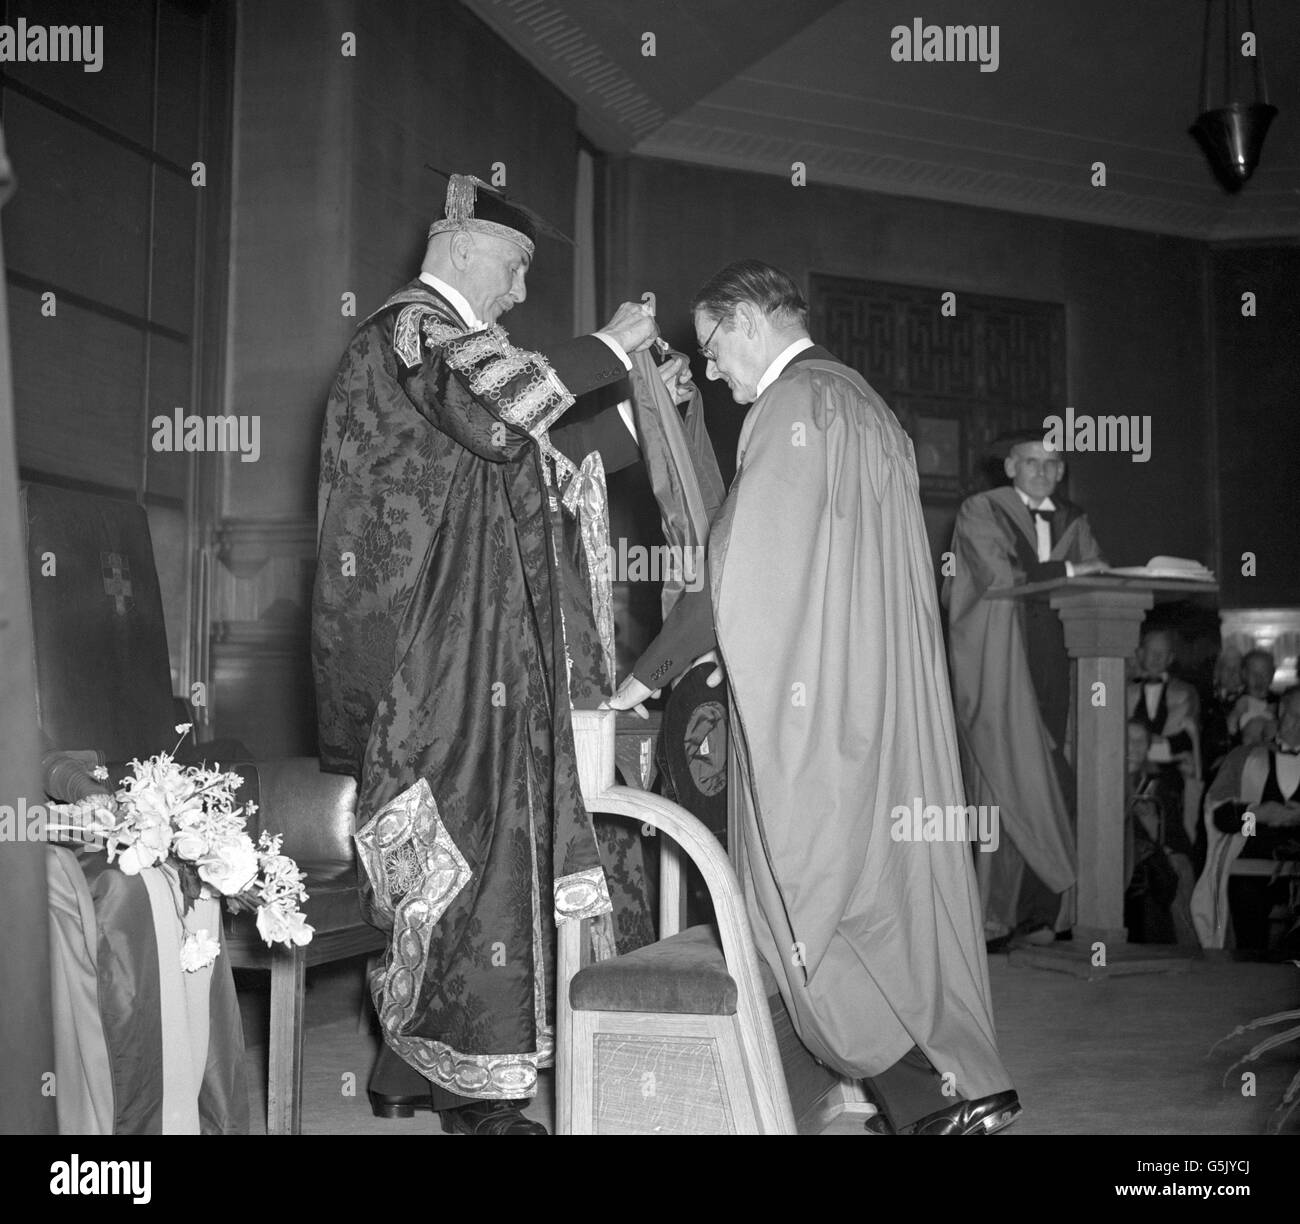 Poetry - TS Eliot - London. Poet TS Eliot receives an honorary degree from the Earl of Athlone, Chancellor of London University. Stock Photo